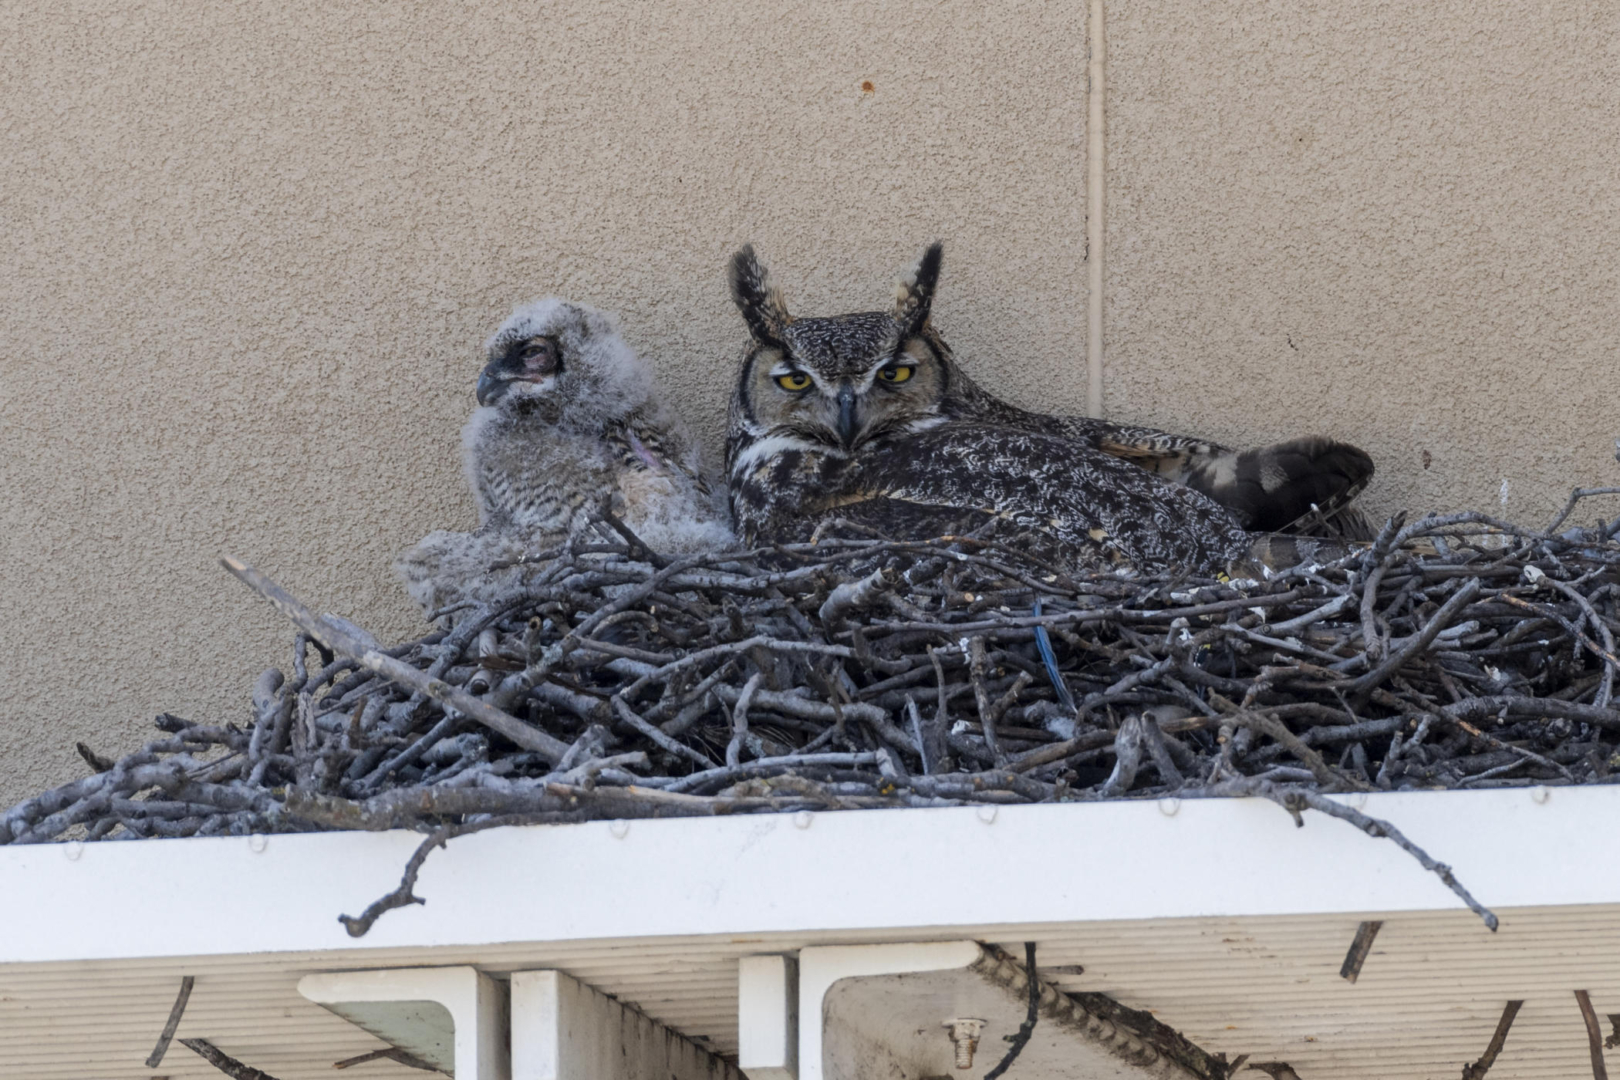 A great horned owl and its chick peer out from a nest on a building ledge.